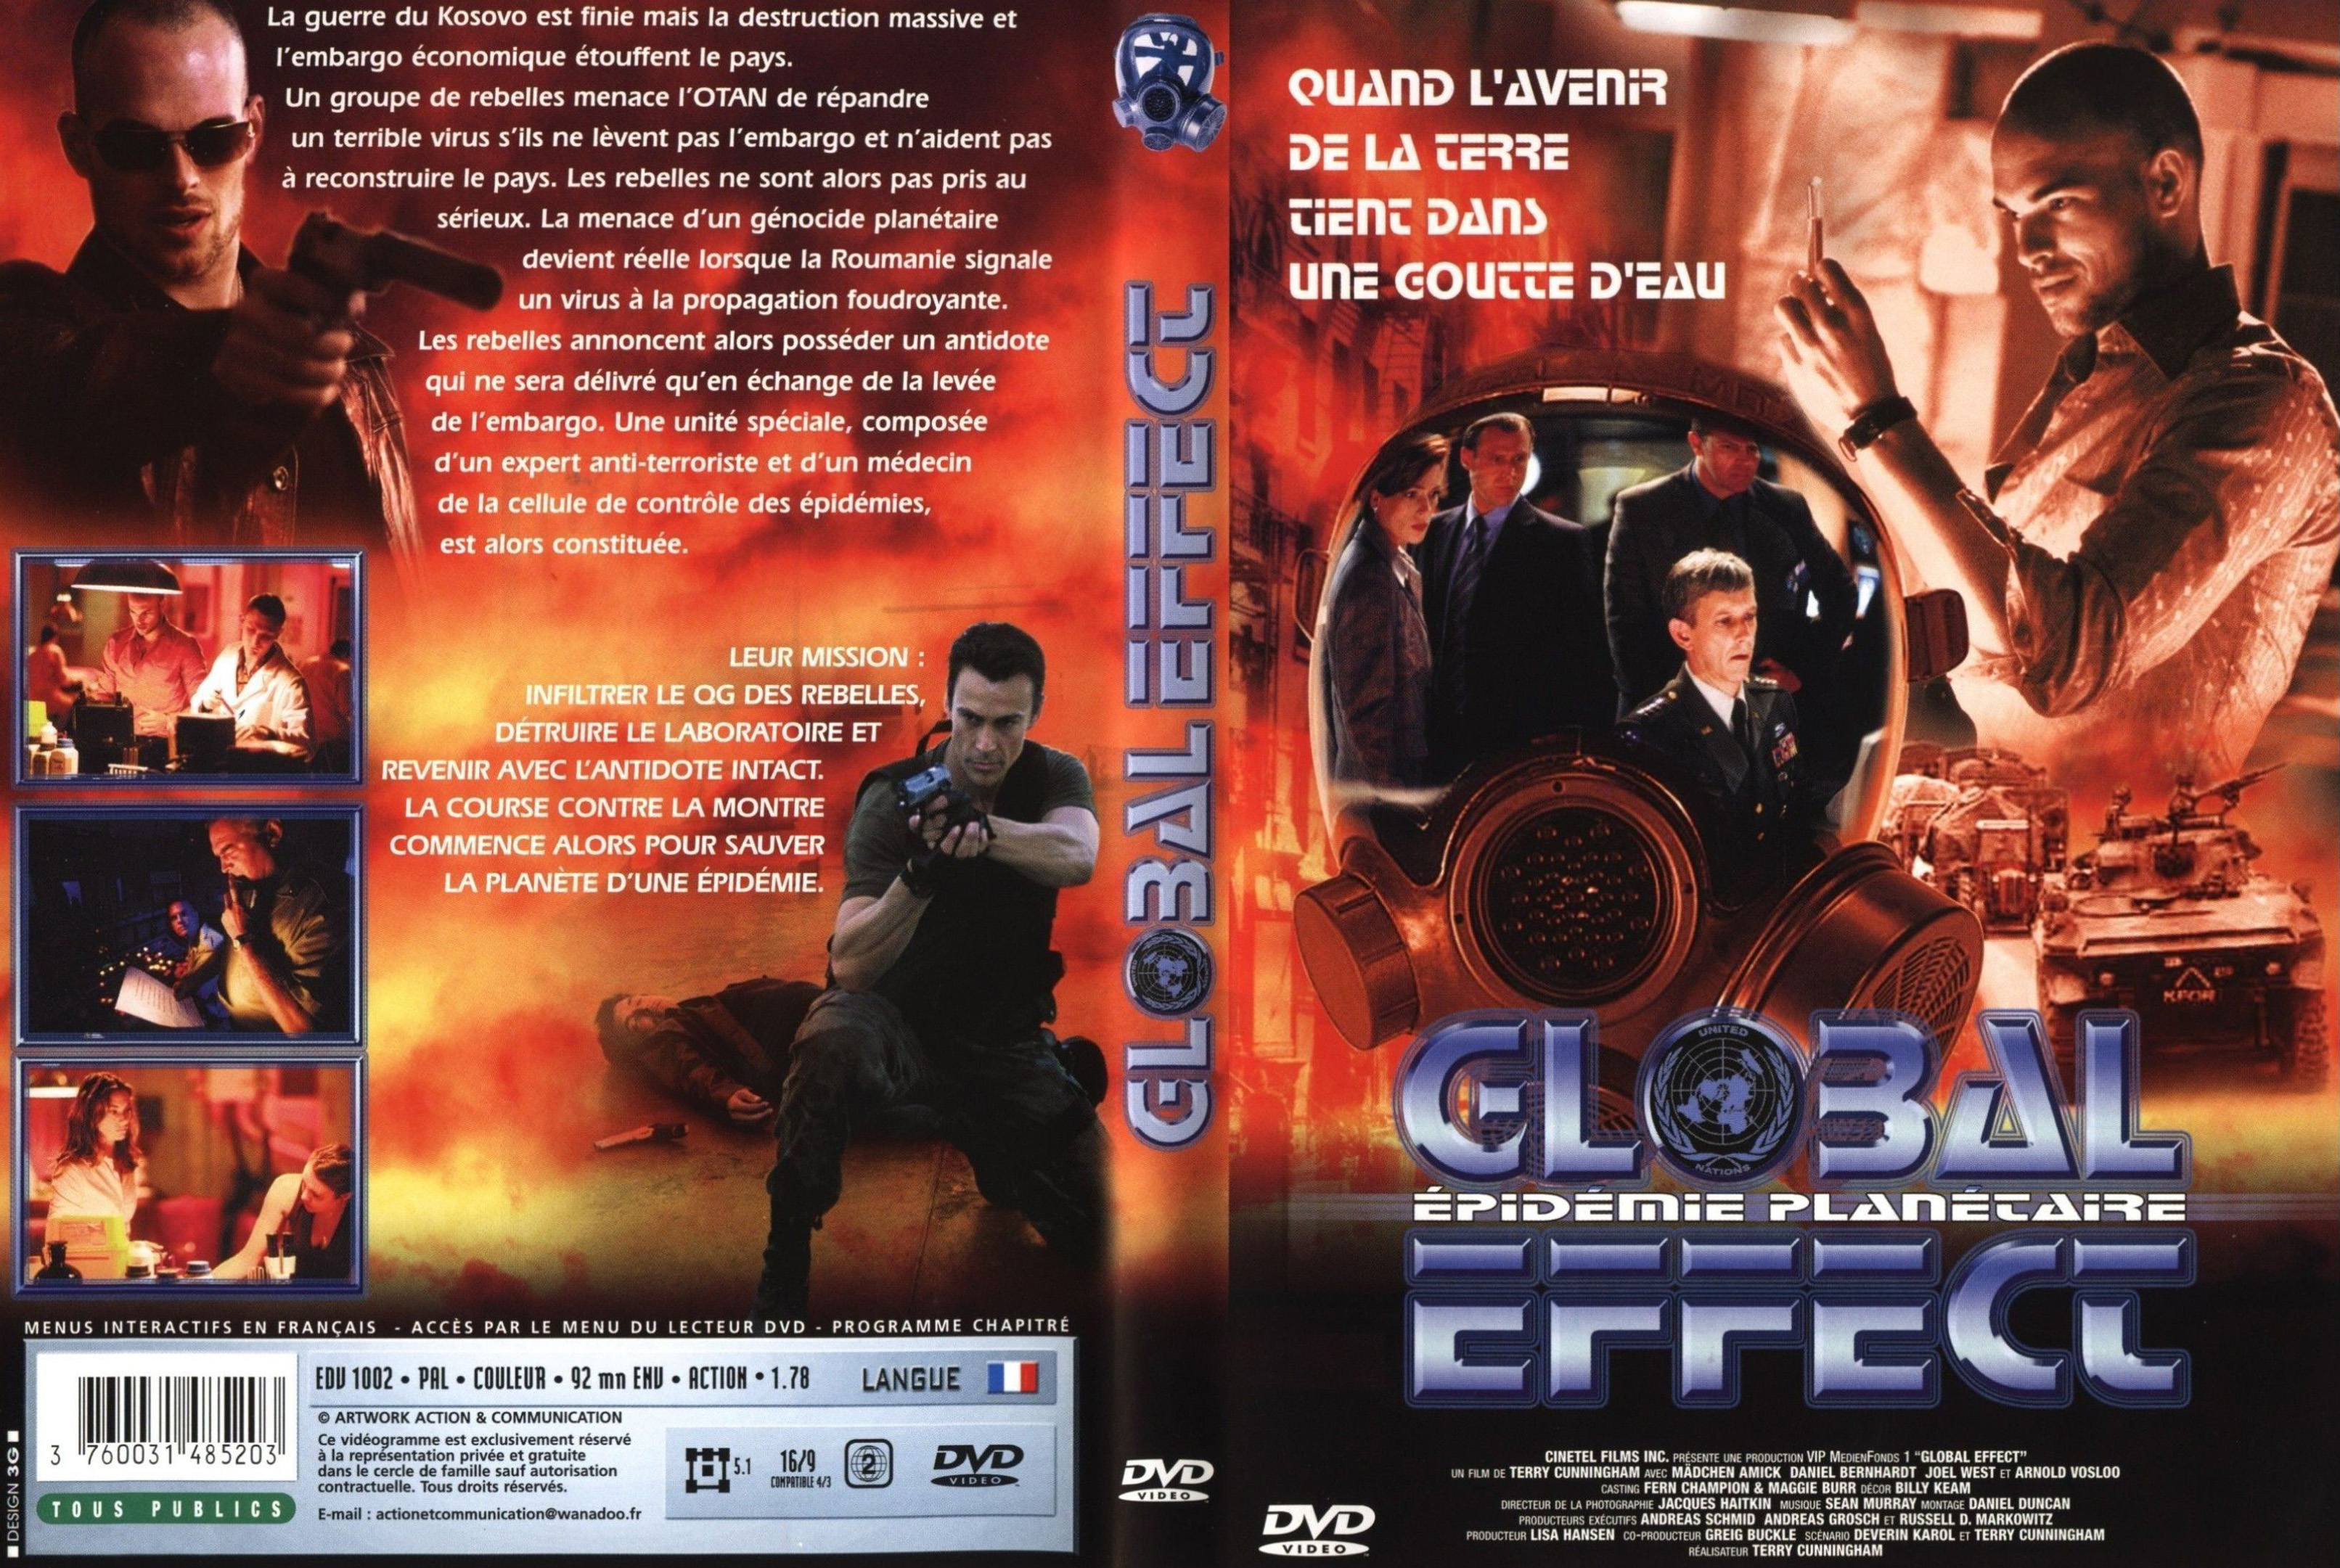 Jaquette DVD Global effect